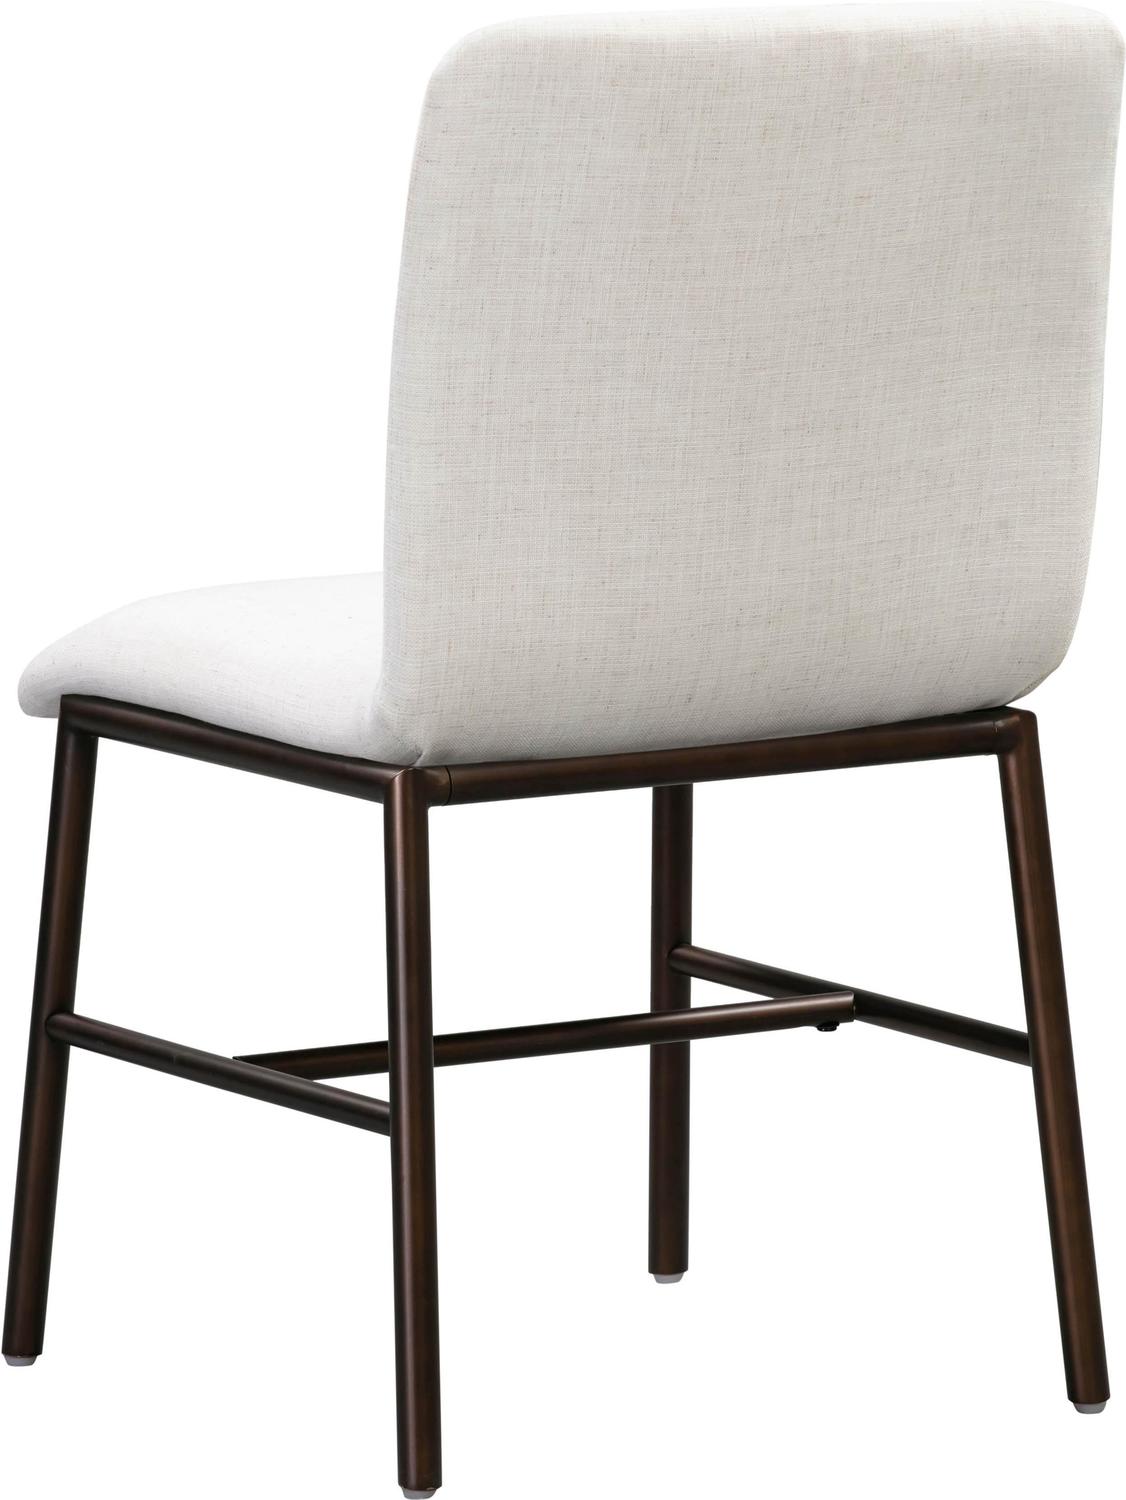 gray and black dining chairs Contemporary Design Furniture Dining Chairs Flax